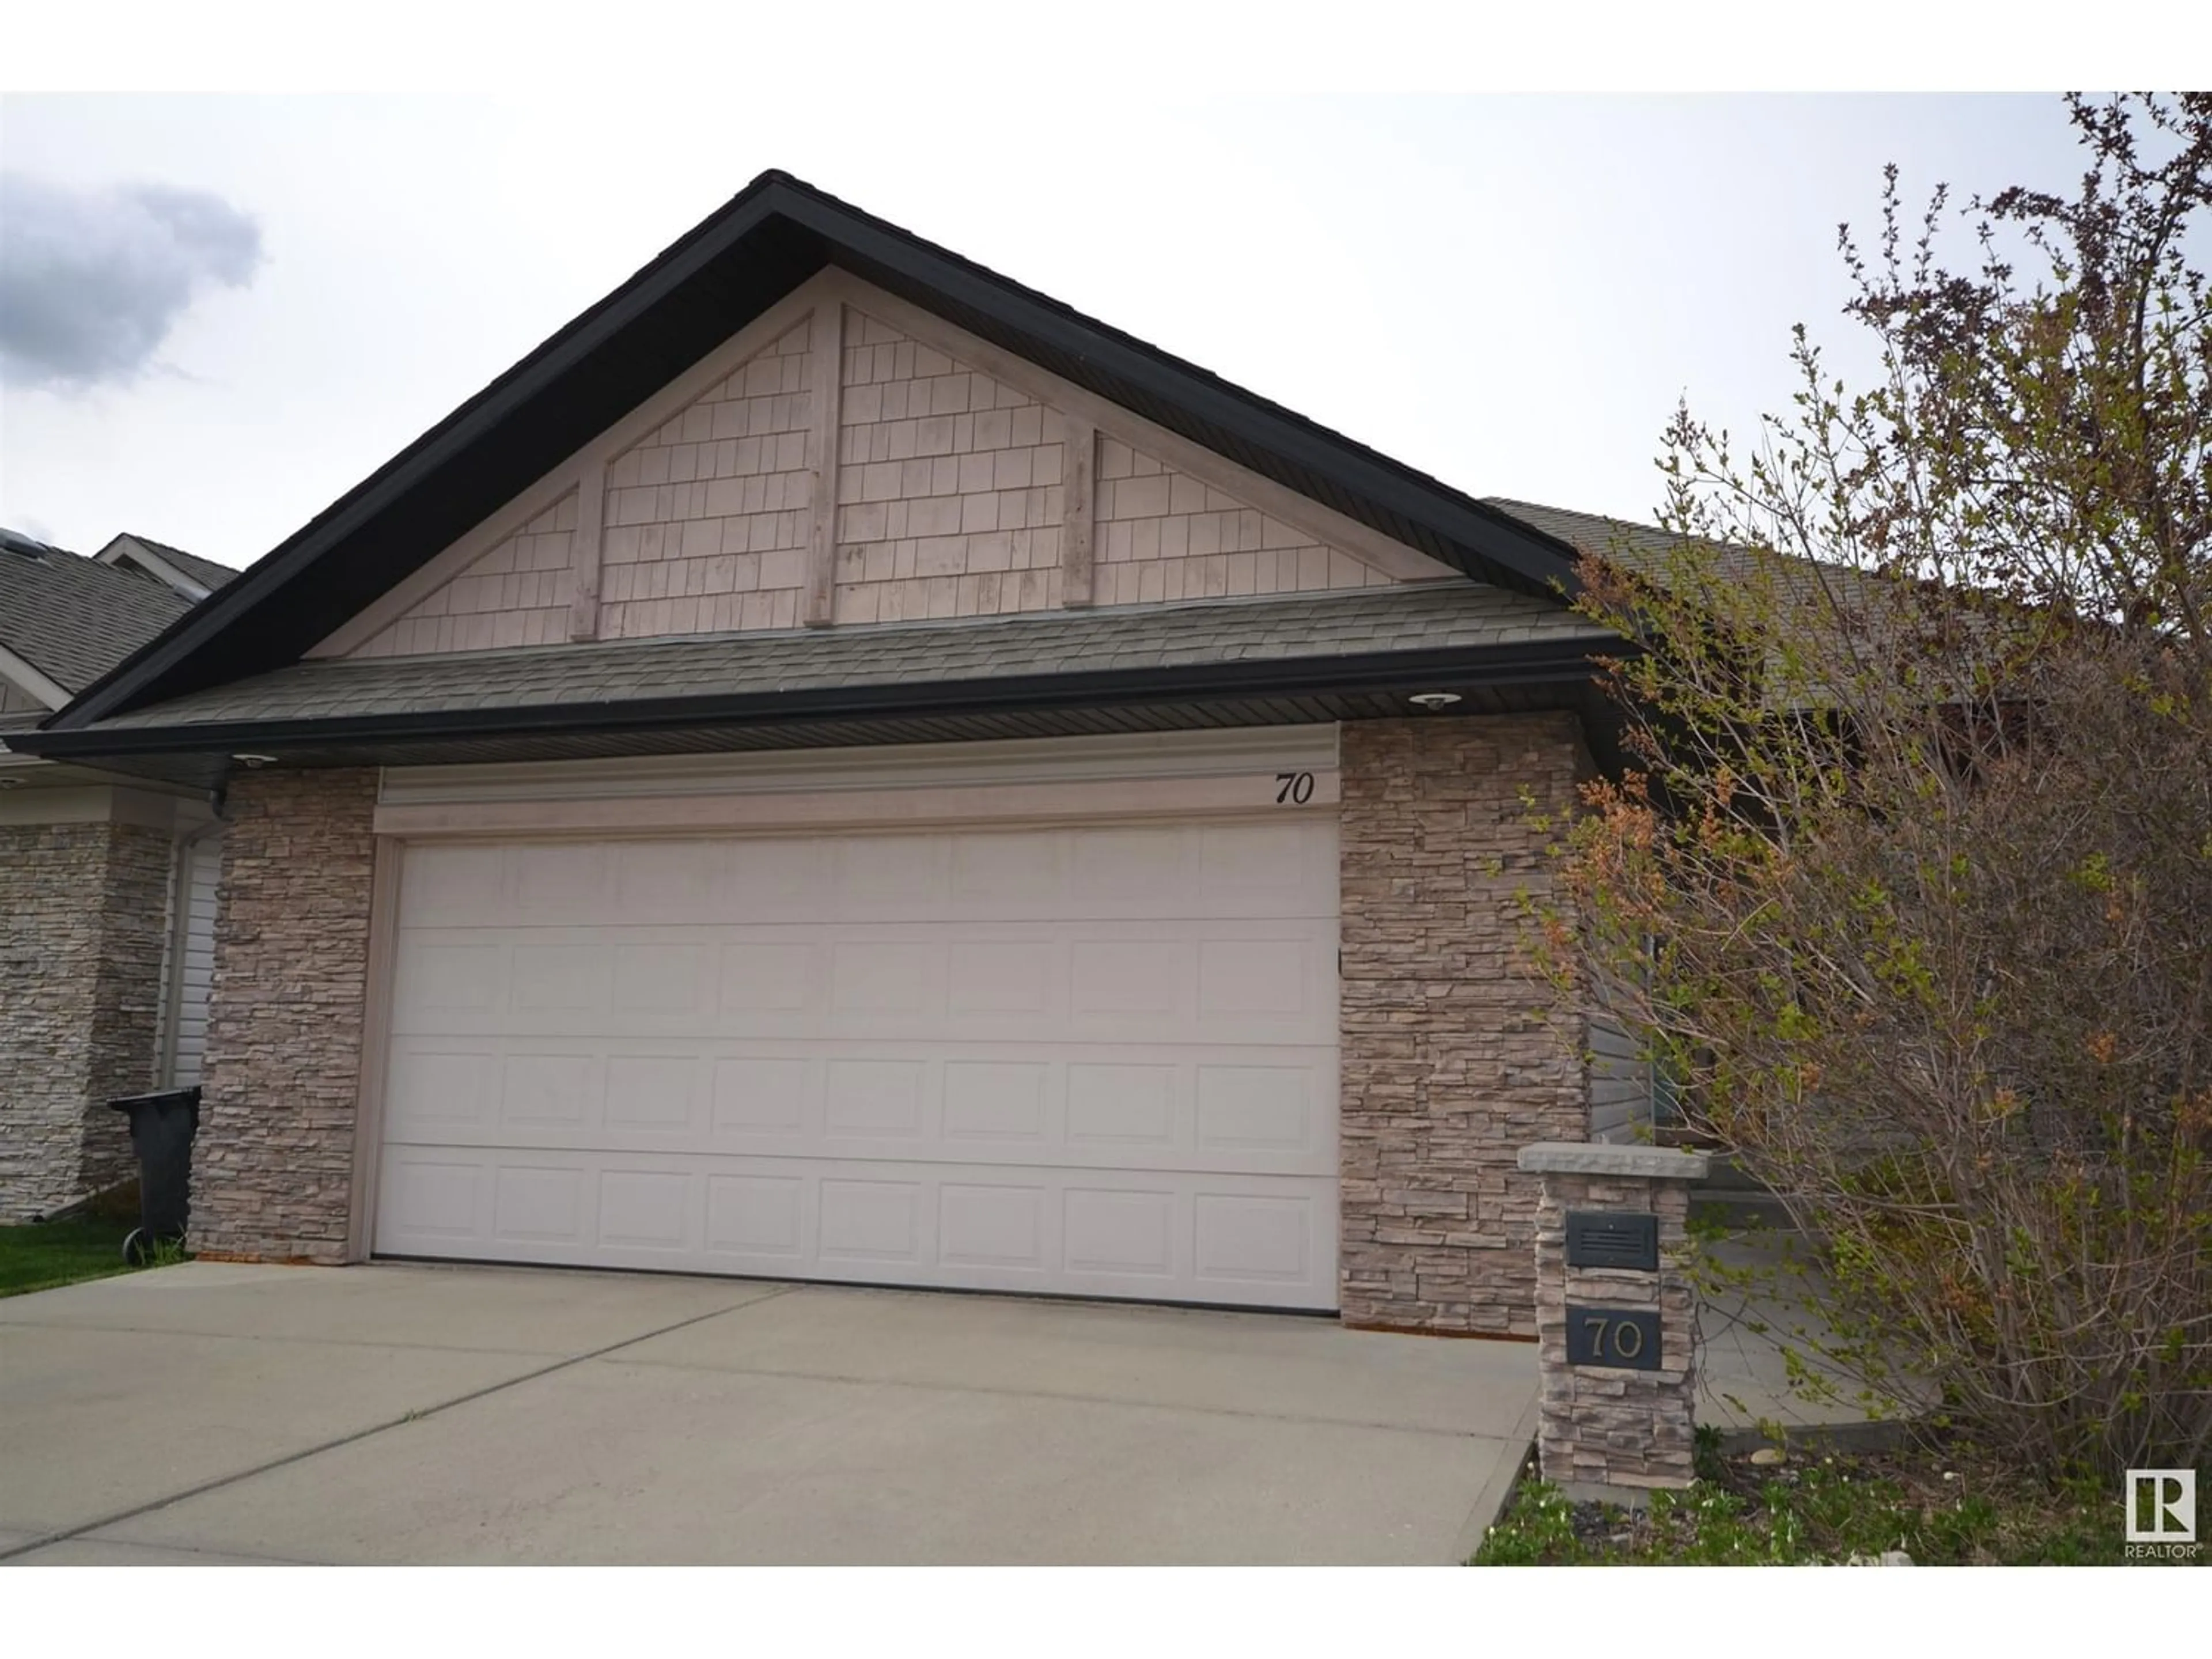 Home with brick exterior material for 70 RIDGELAND PT, Sherwood Park Alberta T8A6N5